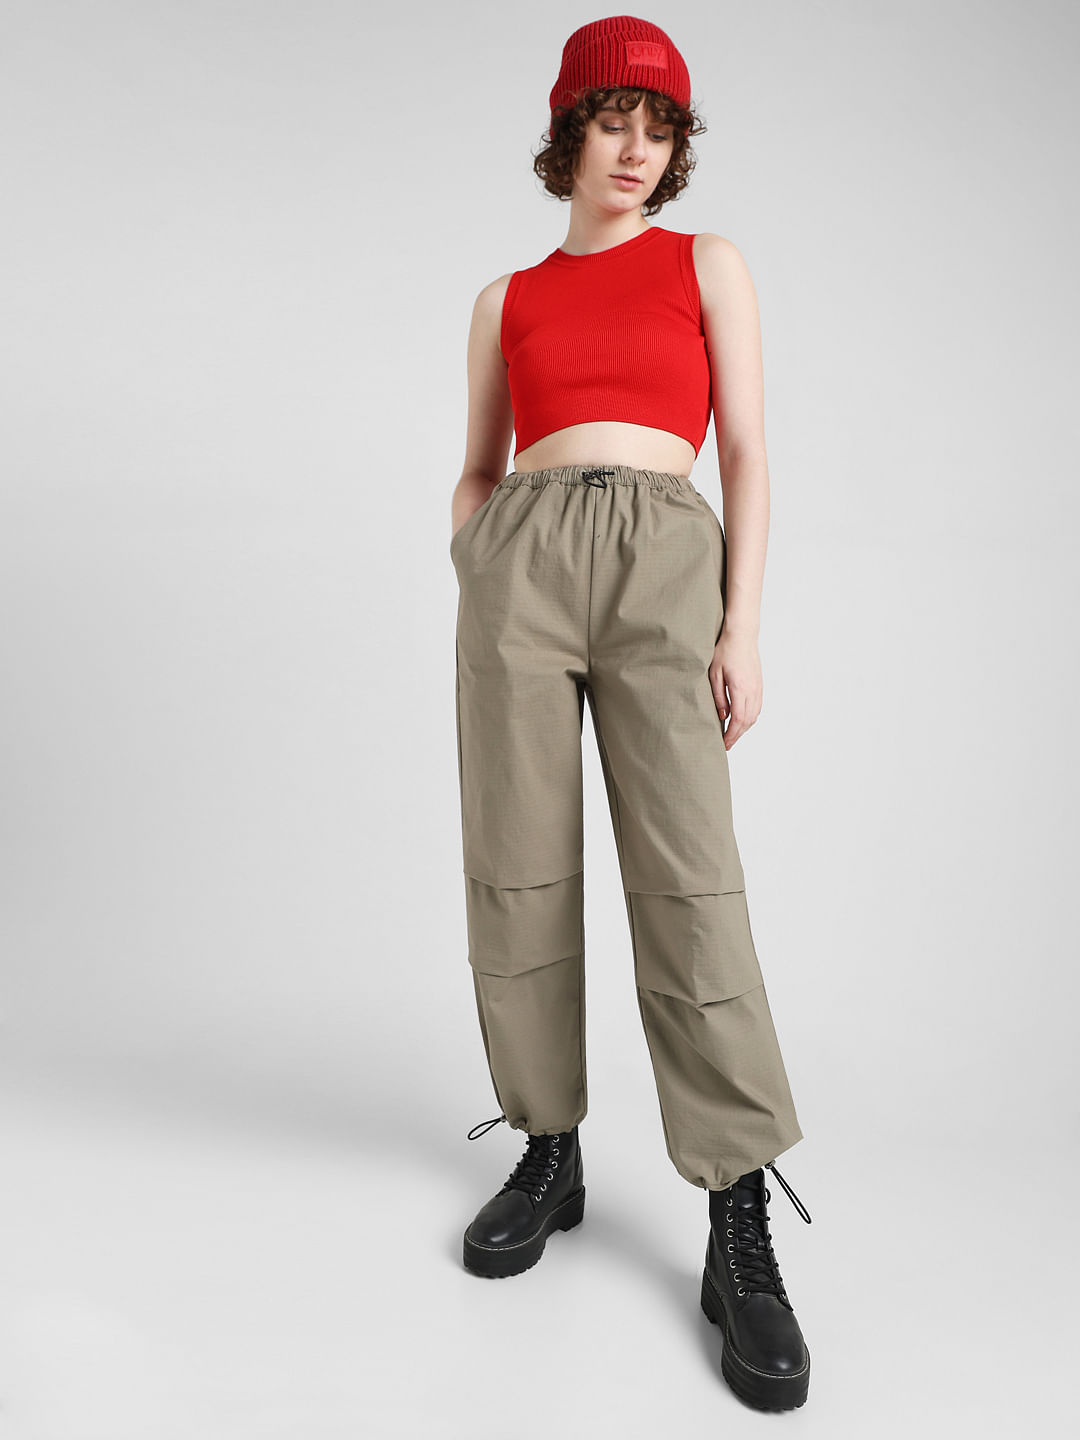 High Waist Solid Wide Leg Pants | Green wide leg pants outfit, Stylish work  attire, Color combinations for clothes